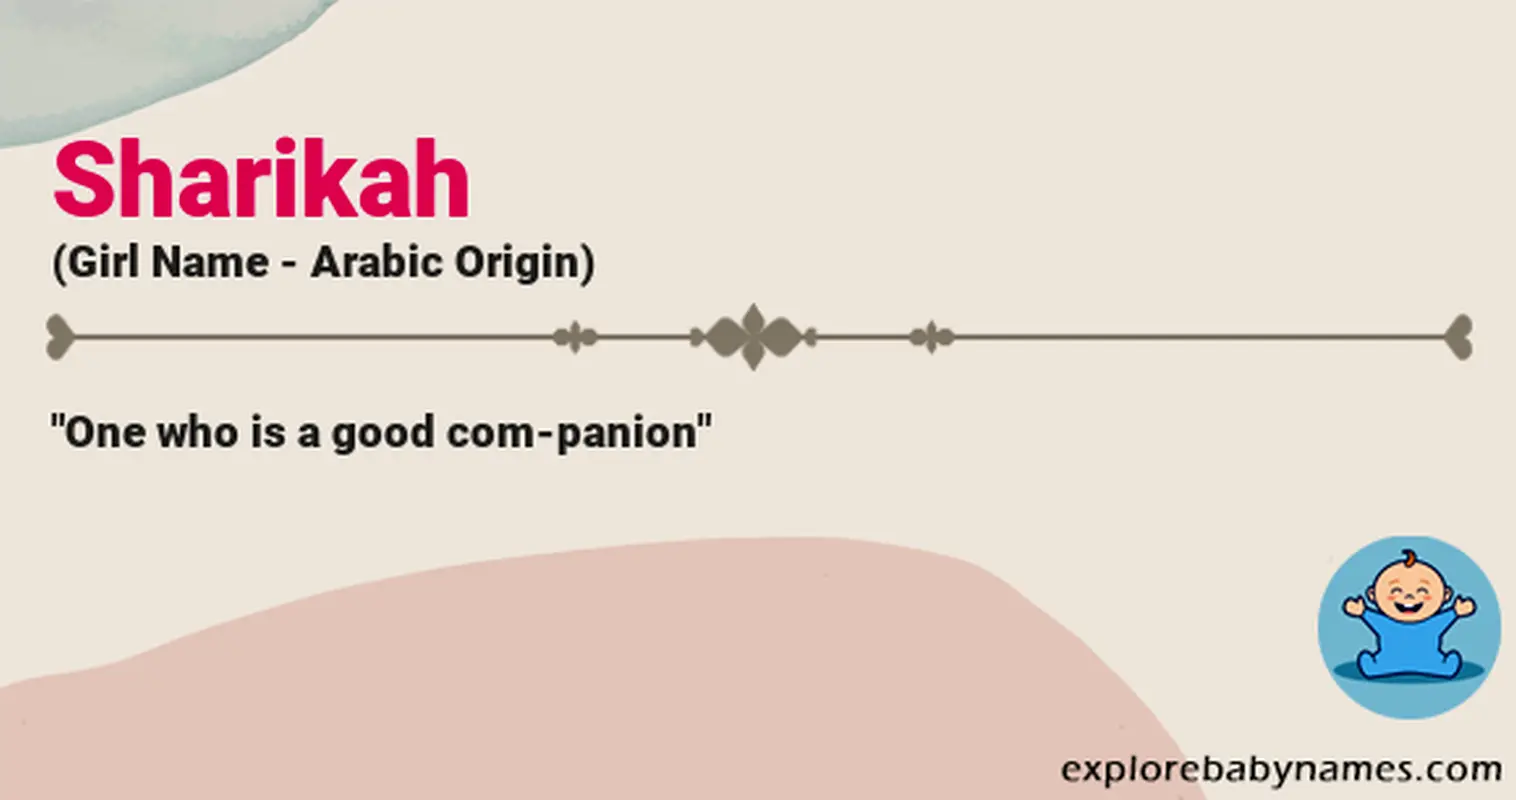 Meaning of Sharikah